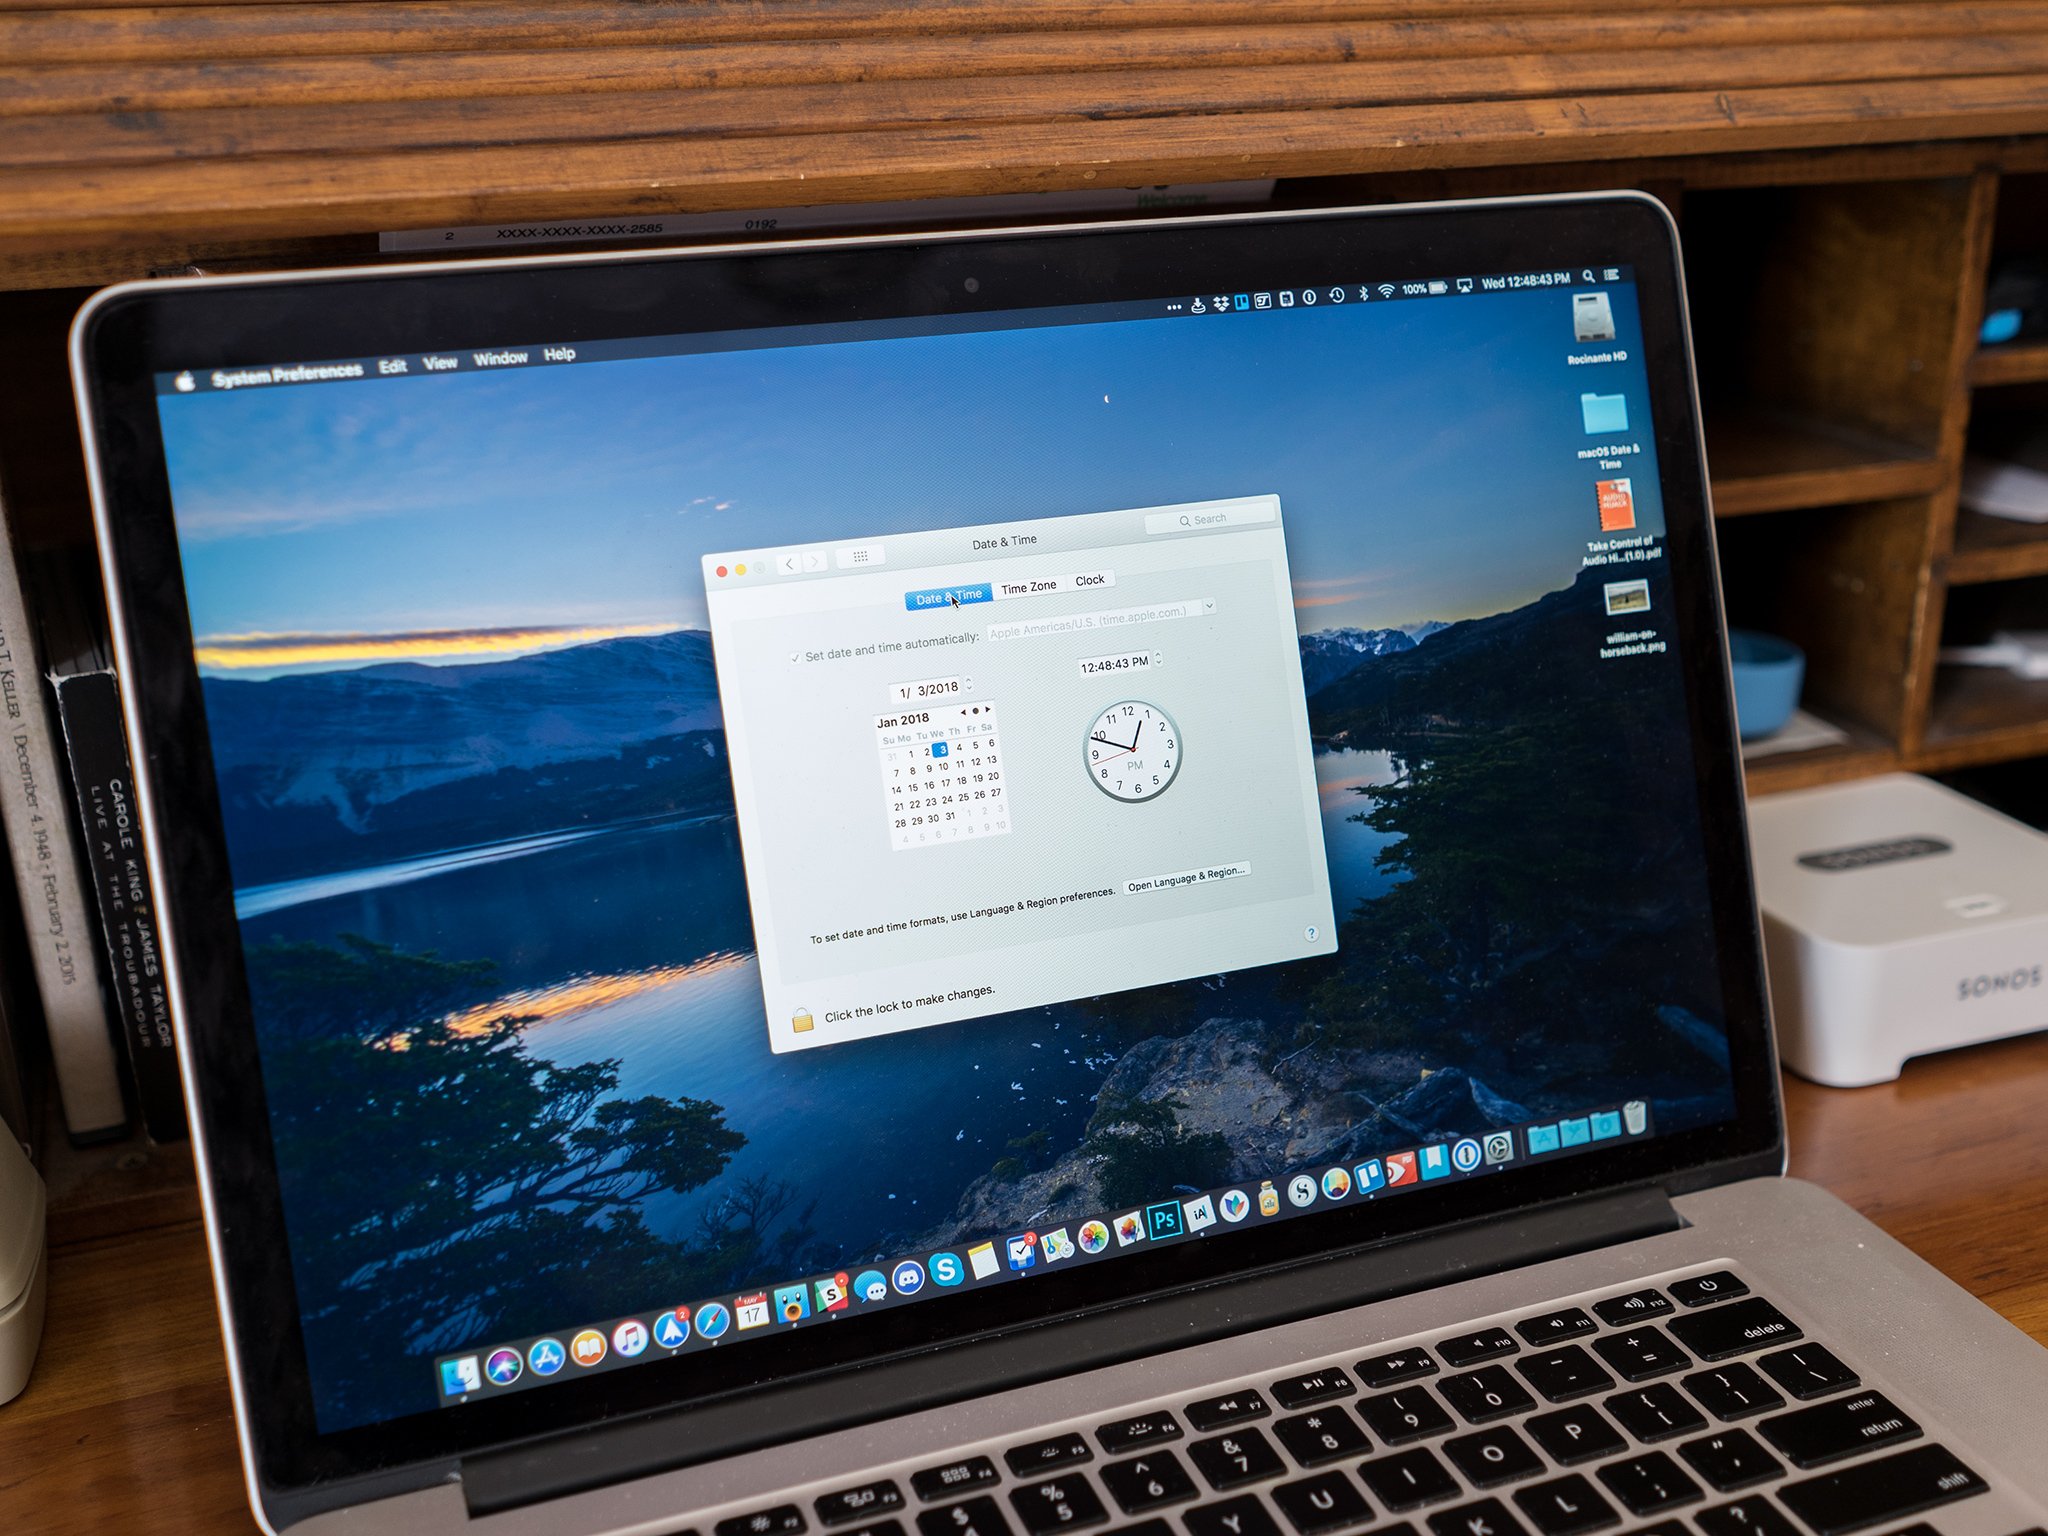 eksplodere Pakistan Afdæk How to fix your Mac's clock when it displays the wrong time | iMore